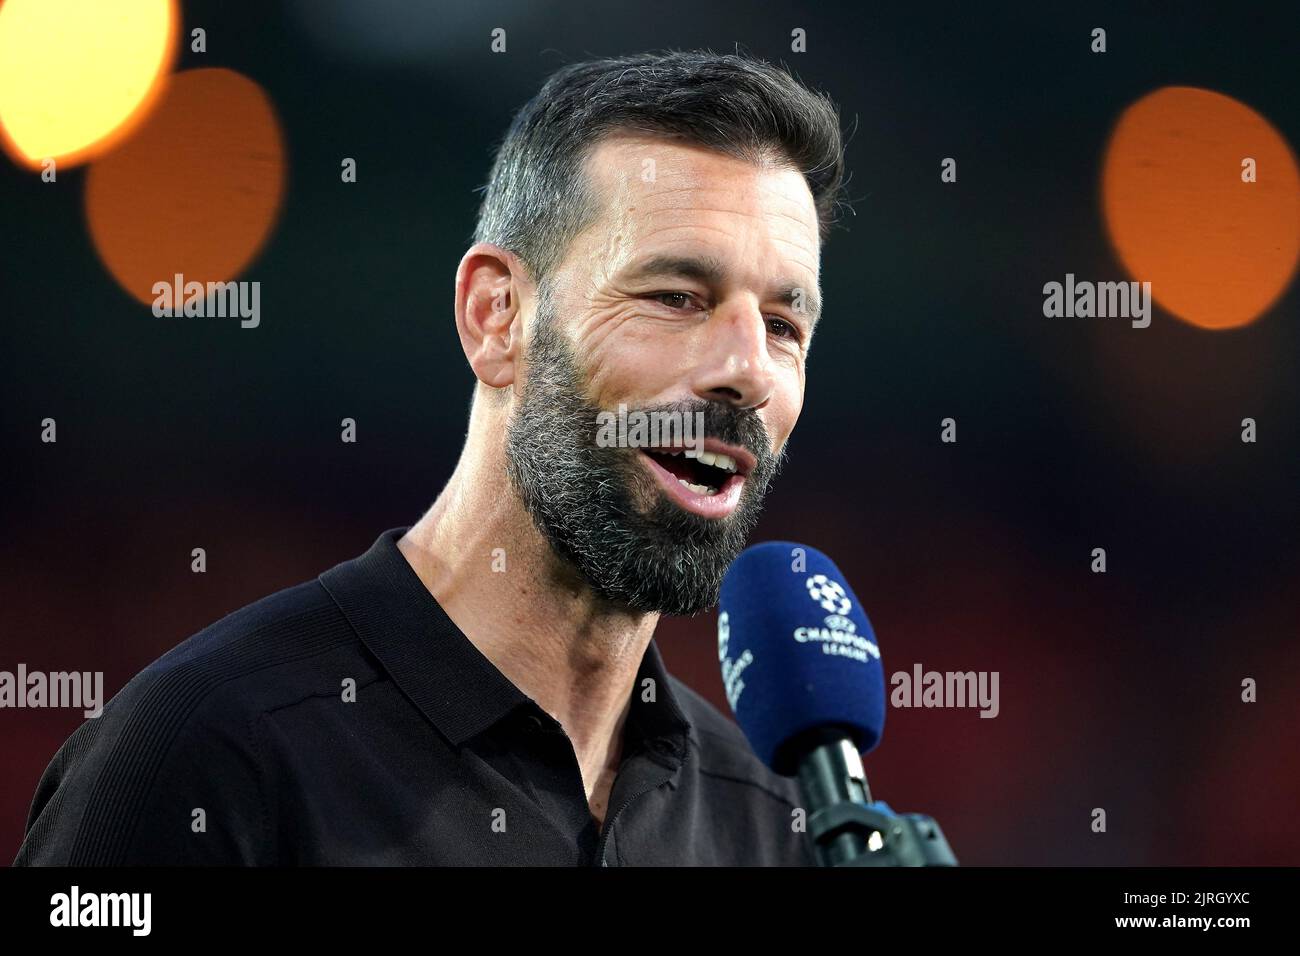 PSV Eindhoven head coach Ruud van Nistelrooy before the UEFA Champions League qualifying match at PSV Stadion, Eindhoven. Picture date: Wednesday August 24, 2022. Stock Photo